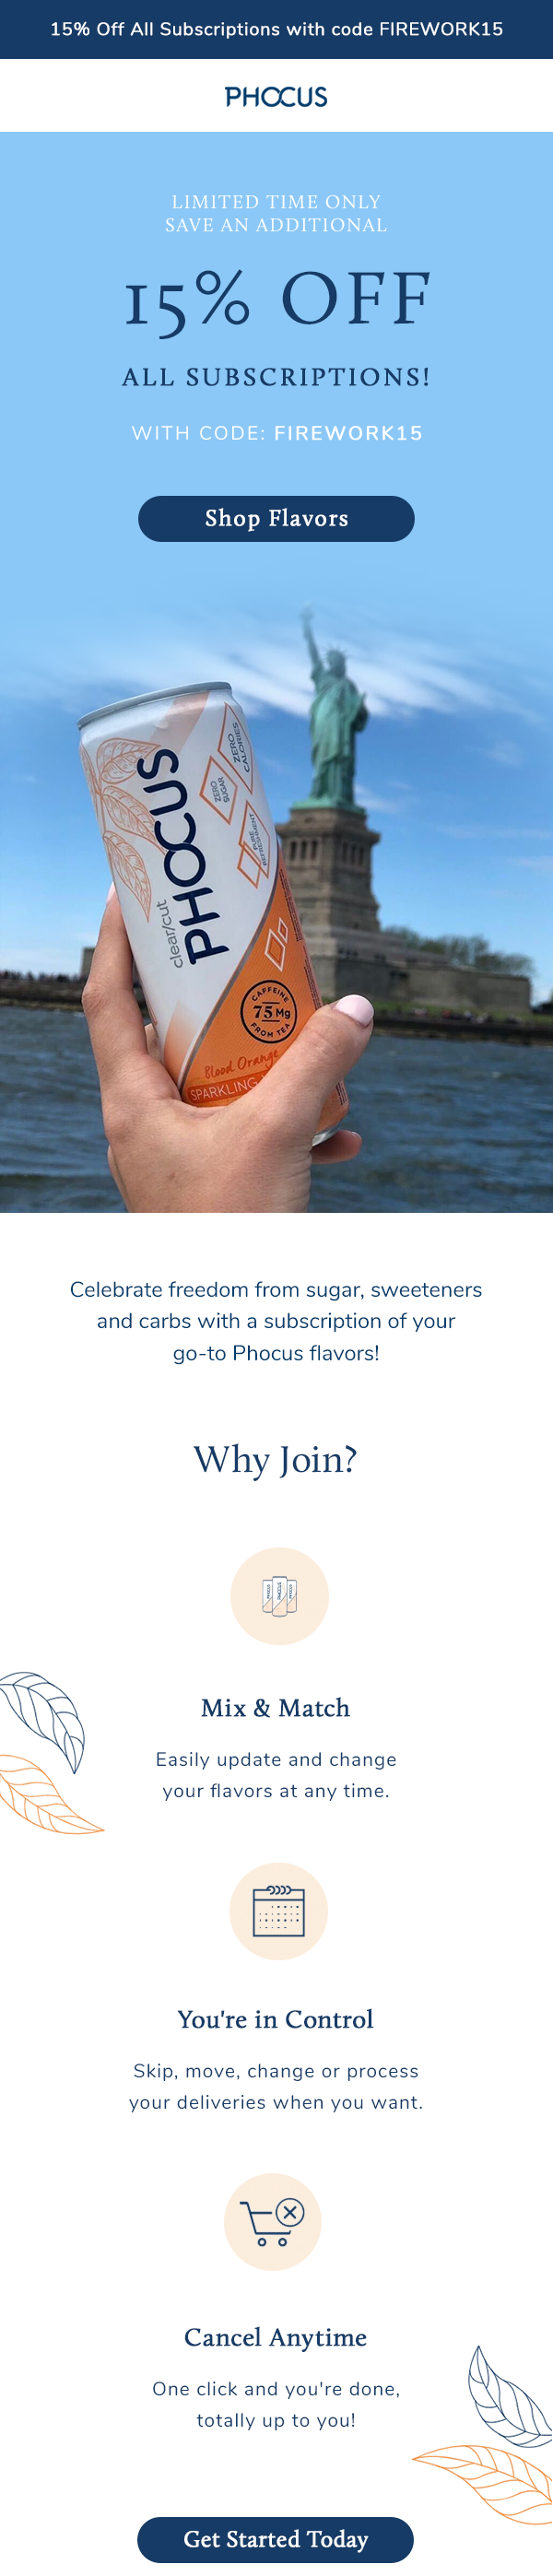 LIMITED TIME ONLY SAVE AN ADDITIONAL 15% OFF ALL SUBSCRIPTIONS! WITH CODE: FIREWORK15 - Celebrate freedom from sugar, sweeteners  and carbs with a subscription of your  go-to Phocus flavors! Shop Flavors Now. 